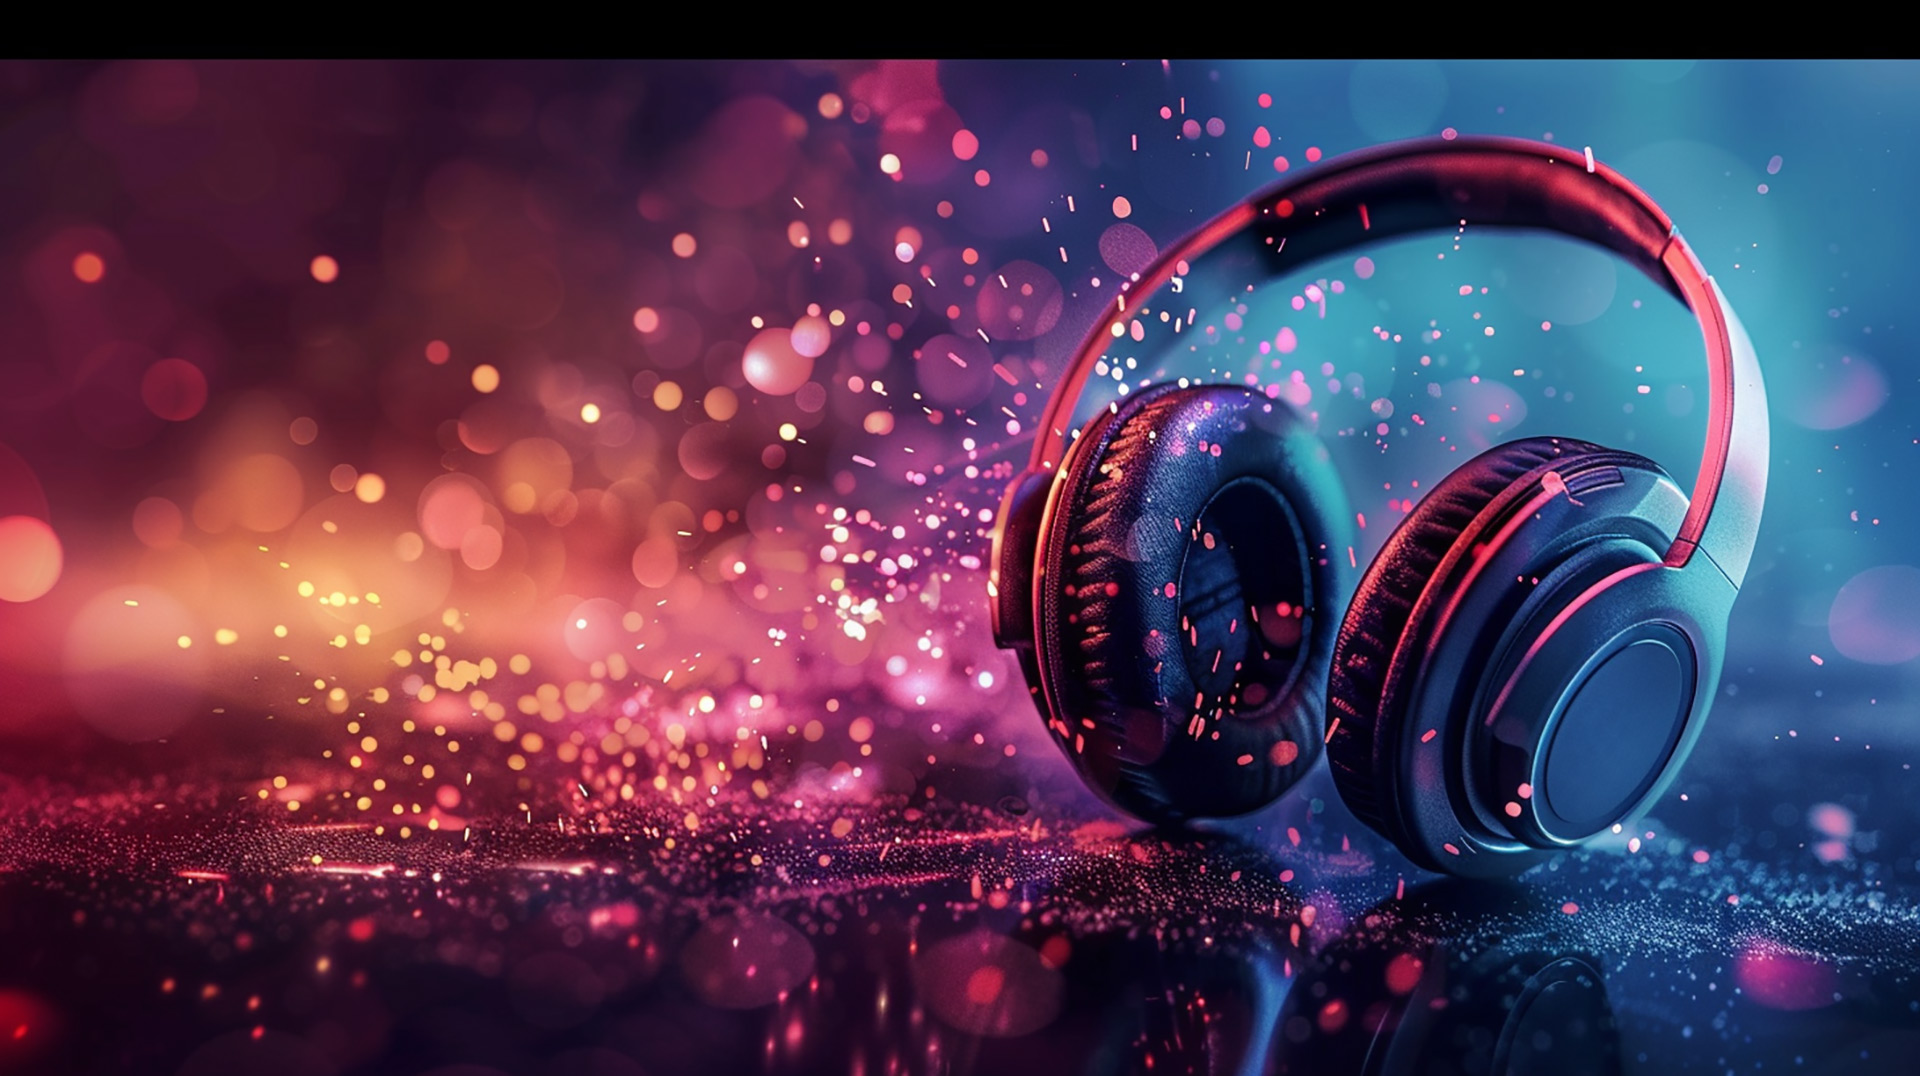 Relaxation Station: Ultra HD Cool Music Wallpaper